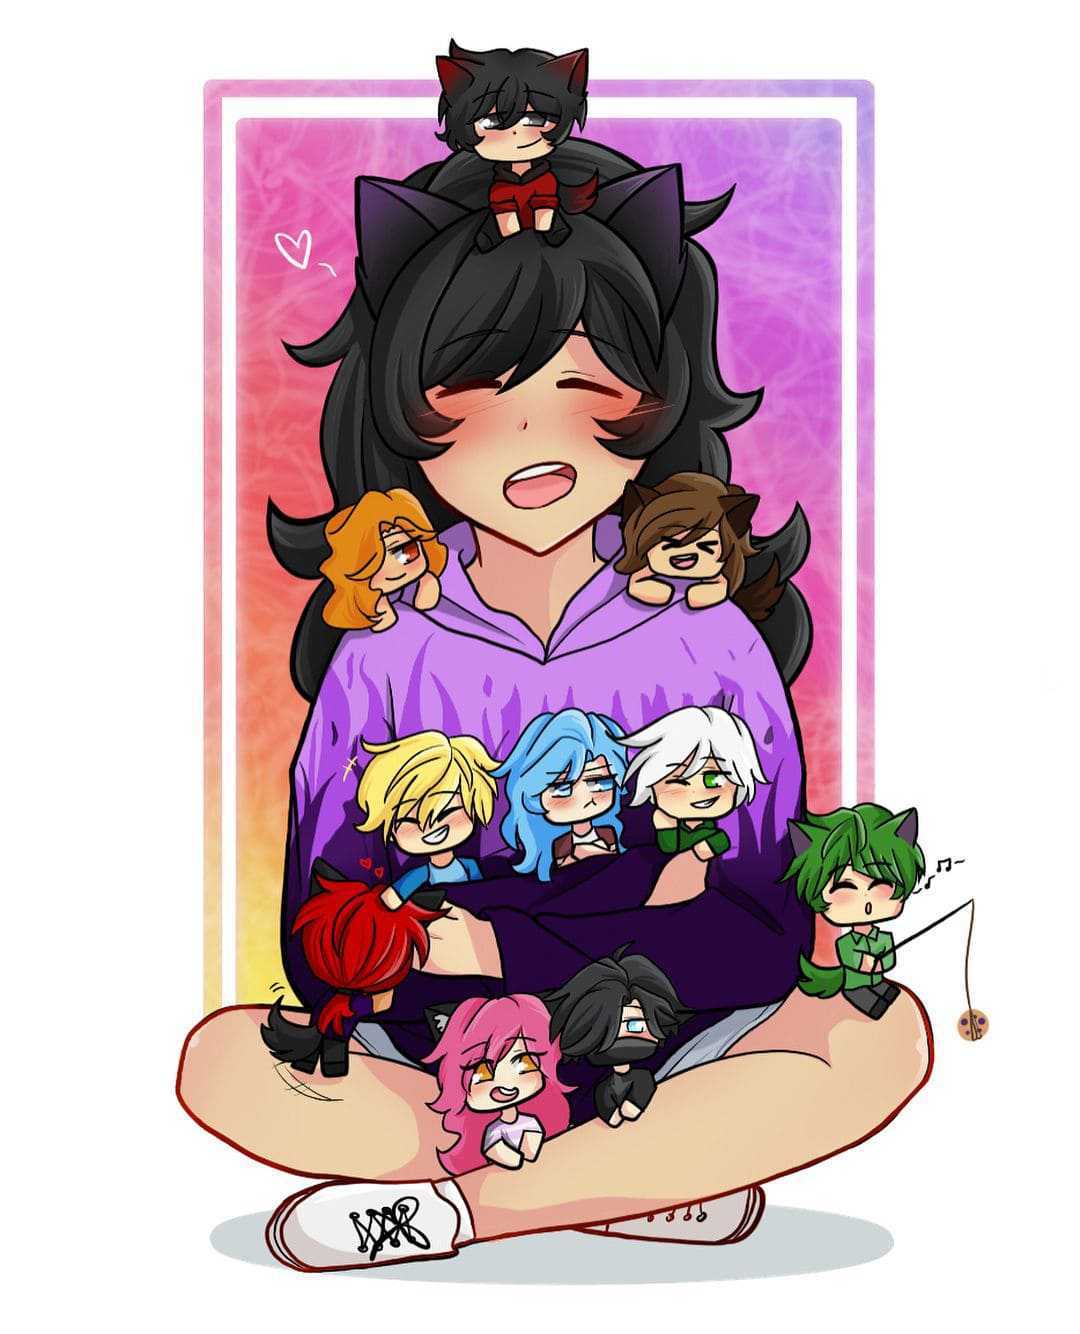 Aphmau wallpaper edit by me gift for others people you can have it  By Aphmau  Wallpapers  Facebook